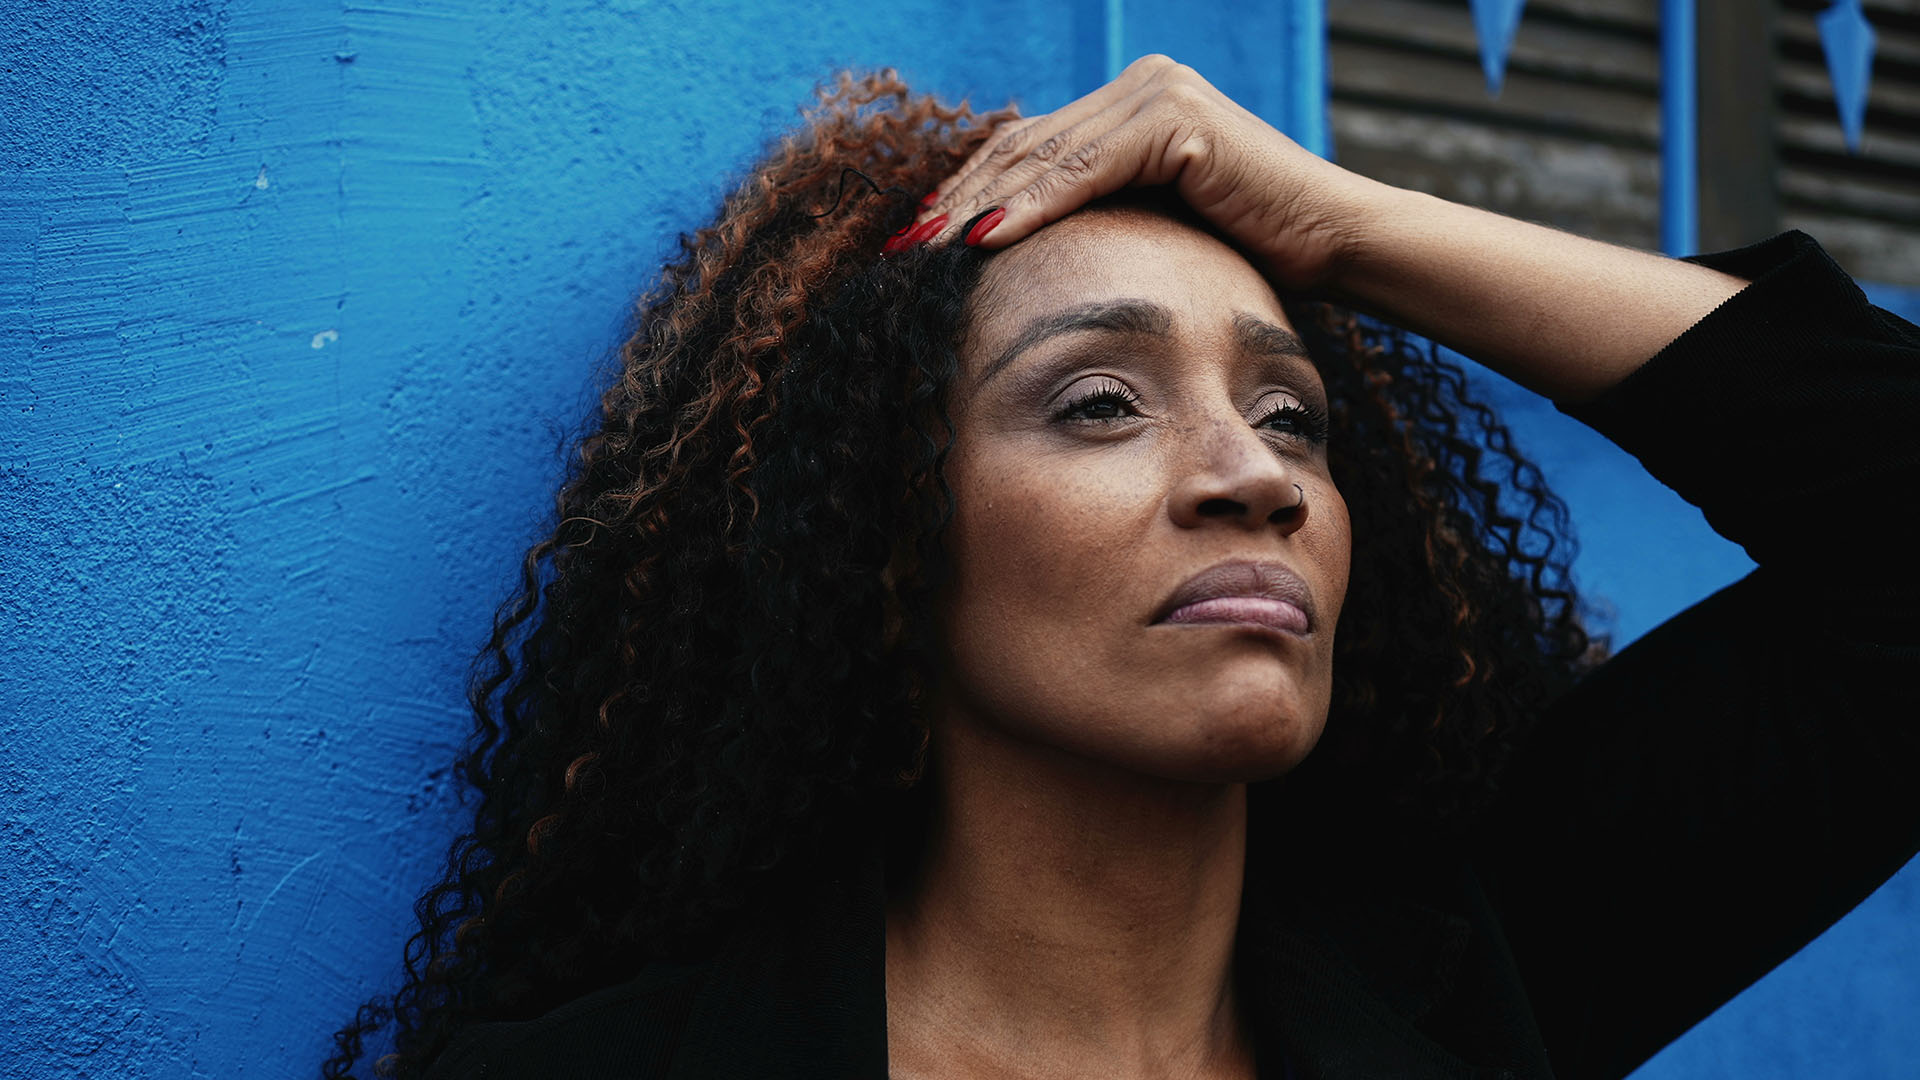 A black woman leans against a wall with her hand on her head looking anxious